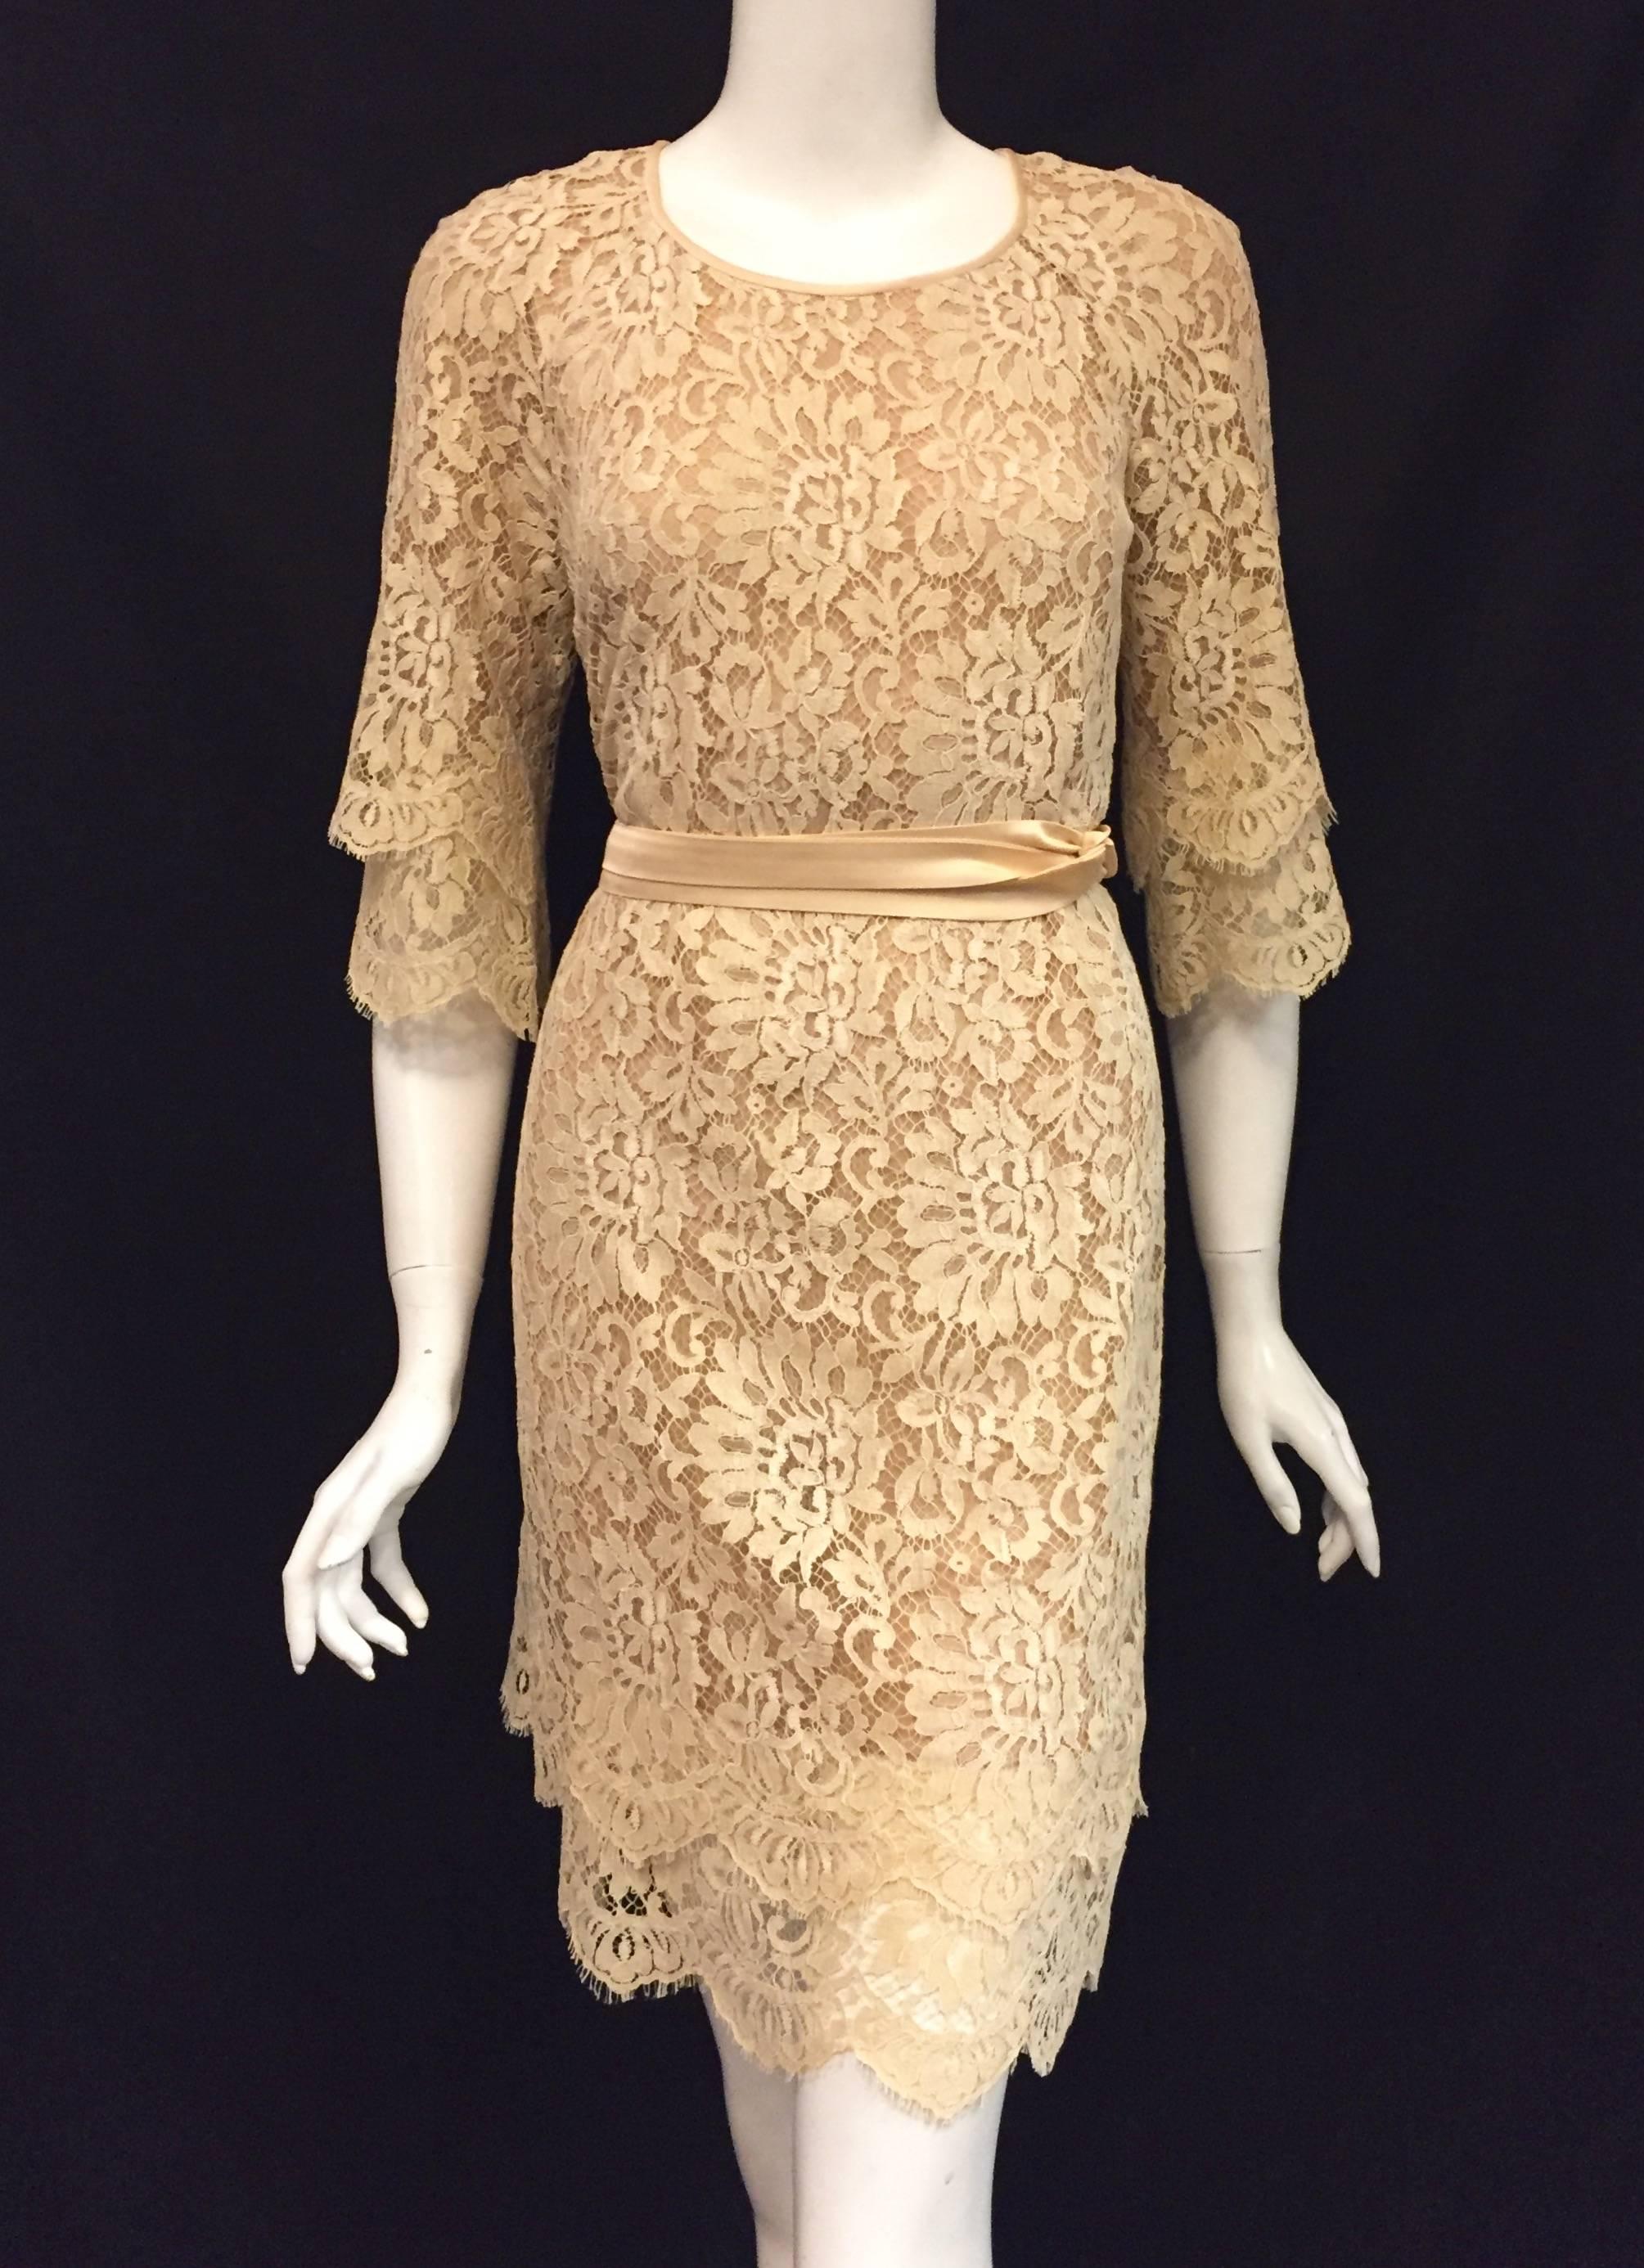 Modern Michael Kors Beige Lace Dress With Double Layer Cuffs and Hem For Sale 1